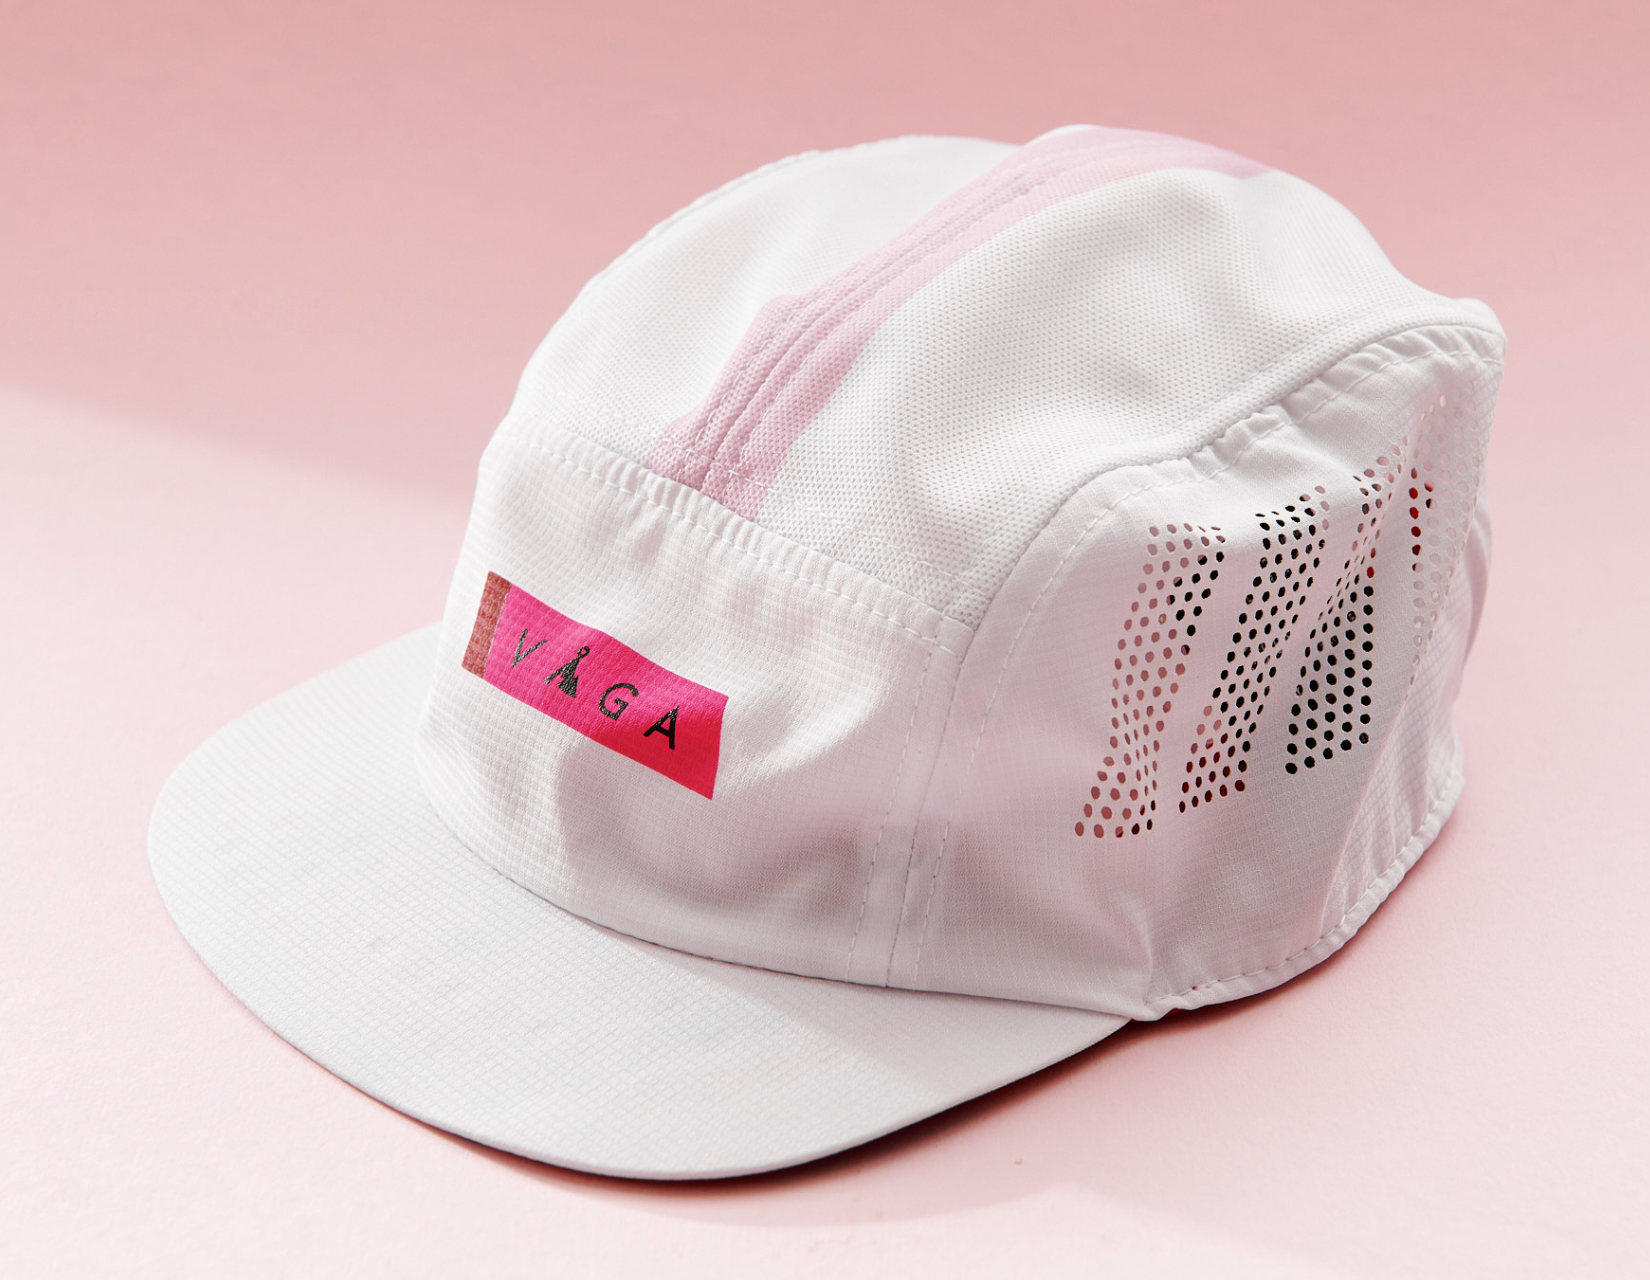 Vaga Feather Cap - White/ Neon Pink/ Flame Red